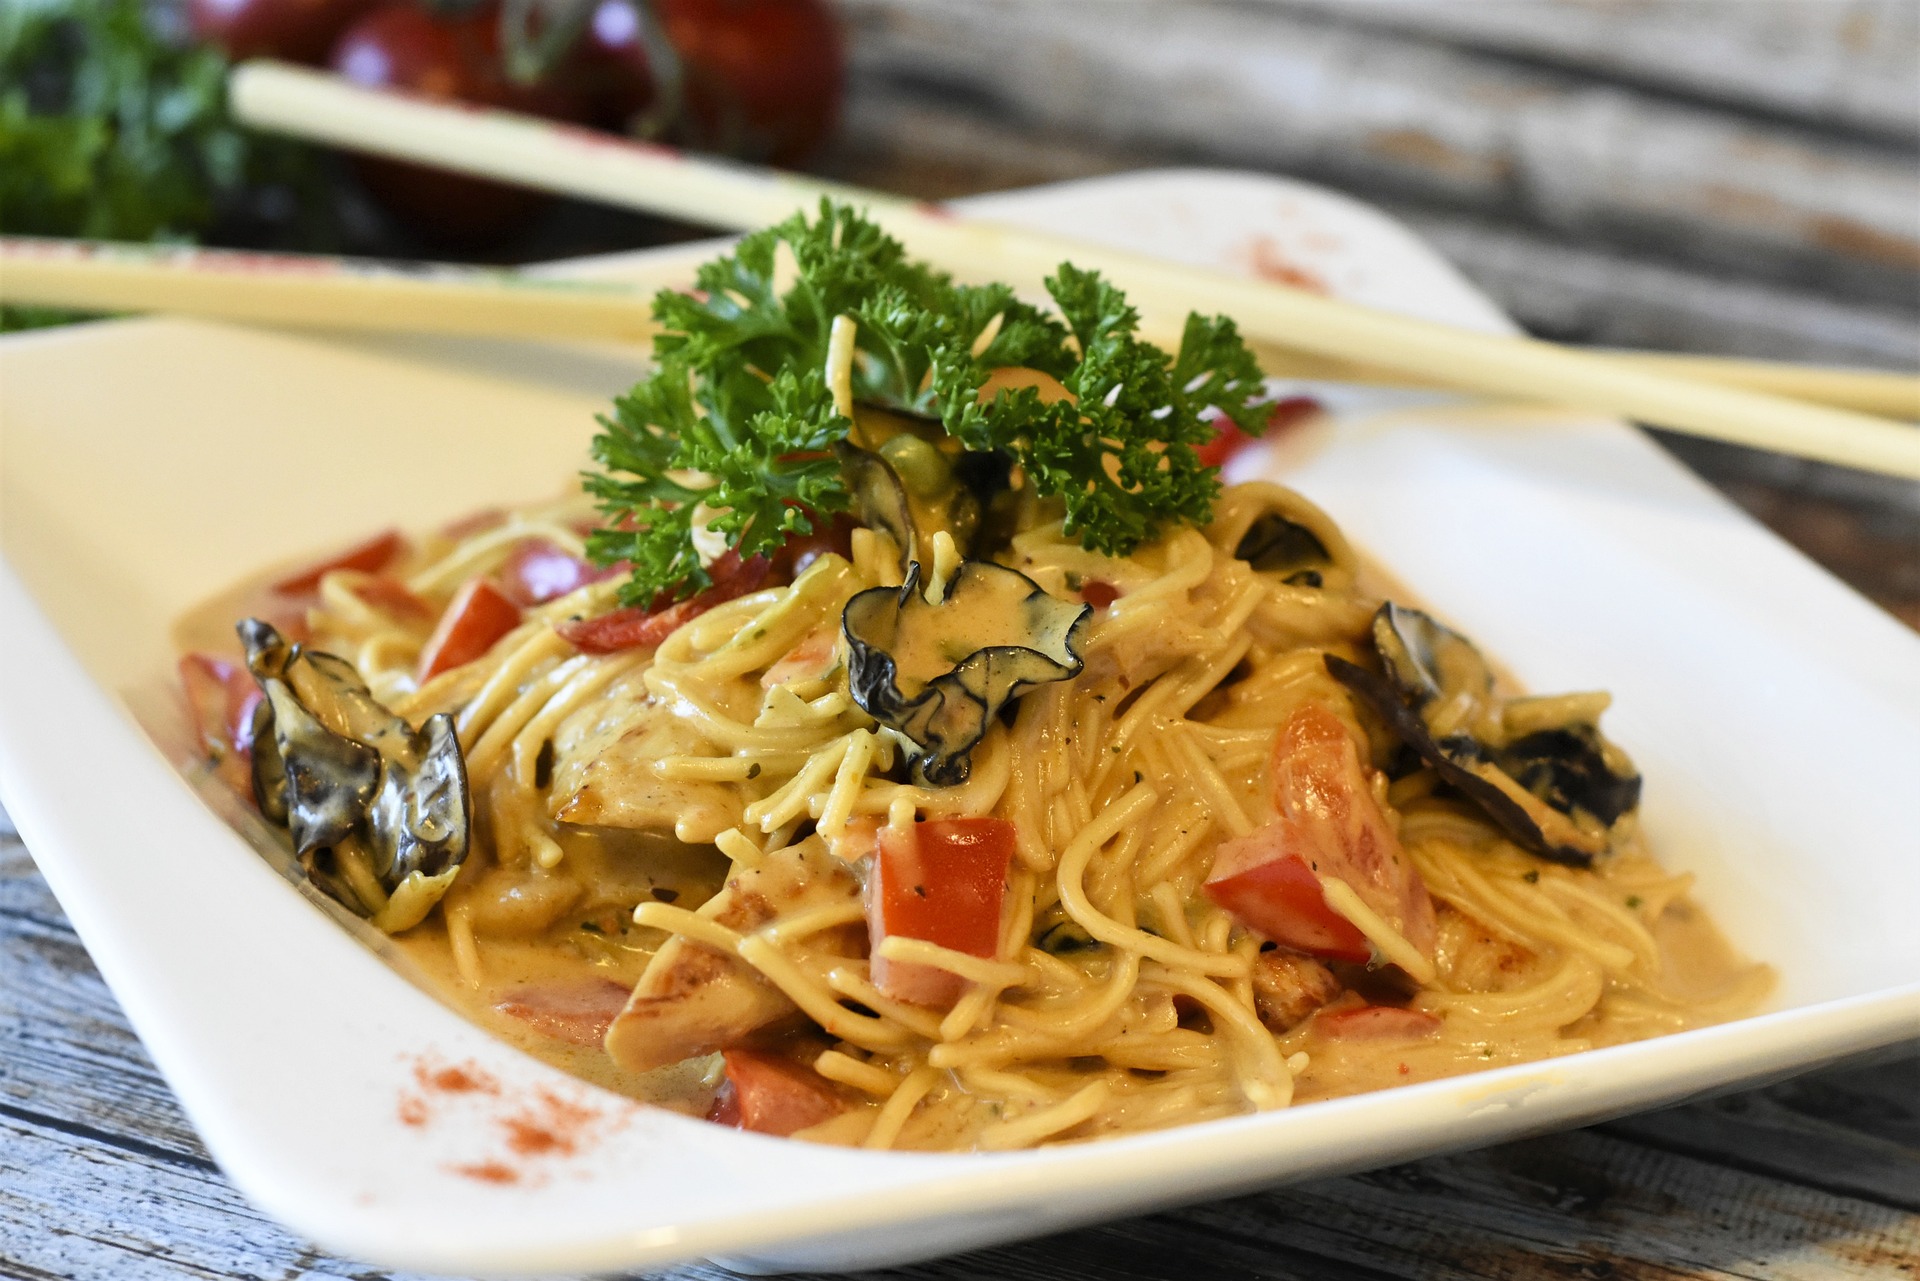 Make your day just fabulous with the Best Noodle Dishes in Dubai